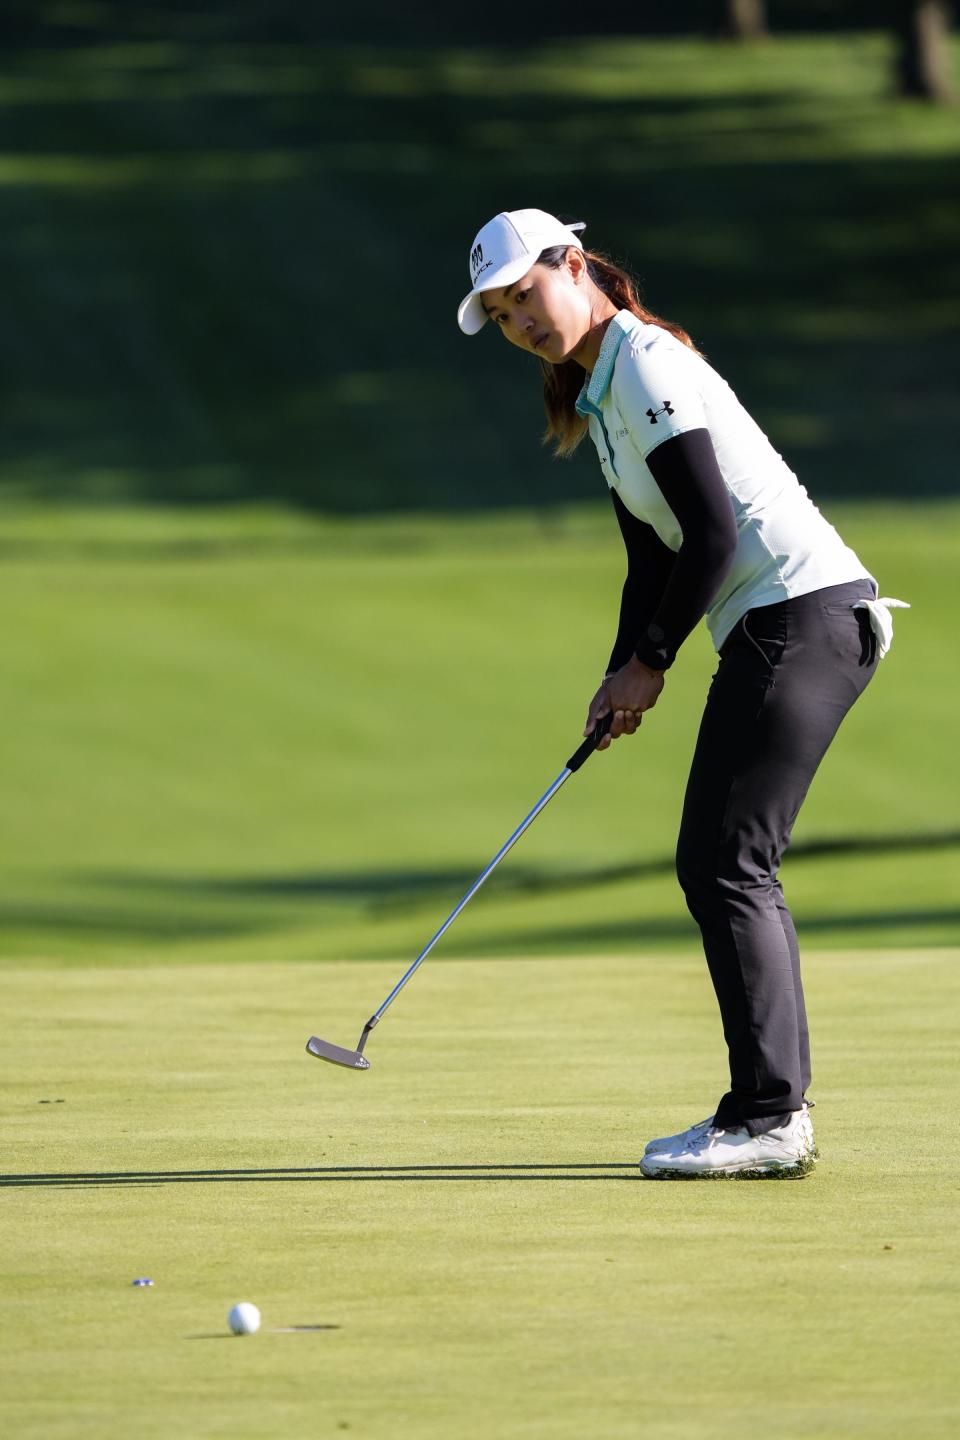 Xiyu Janet Lin puts and misses the hole by inches at the 2022 Kroger Queen City Championship golf tournament on Friday September 9, 2022 at the Kenwood Country Club in Madeira, Ohio.